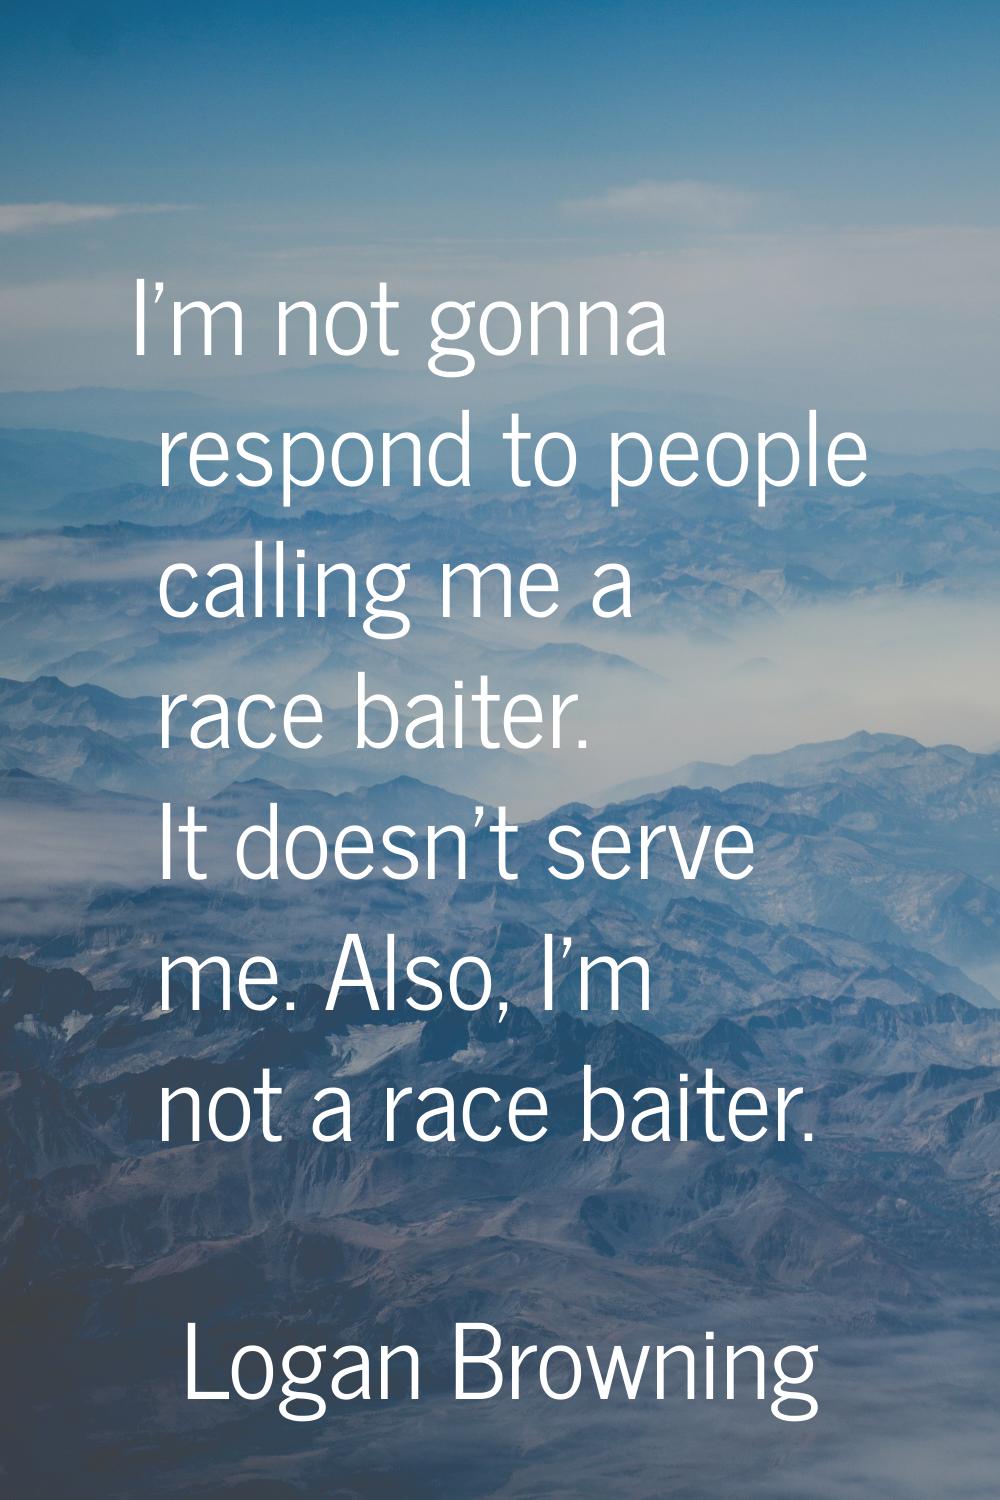 I'm not gonna respond to people calling me a race baiter. It doesn't serve me. Also, I'm not a race